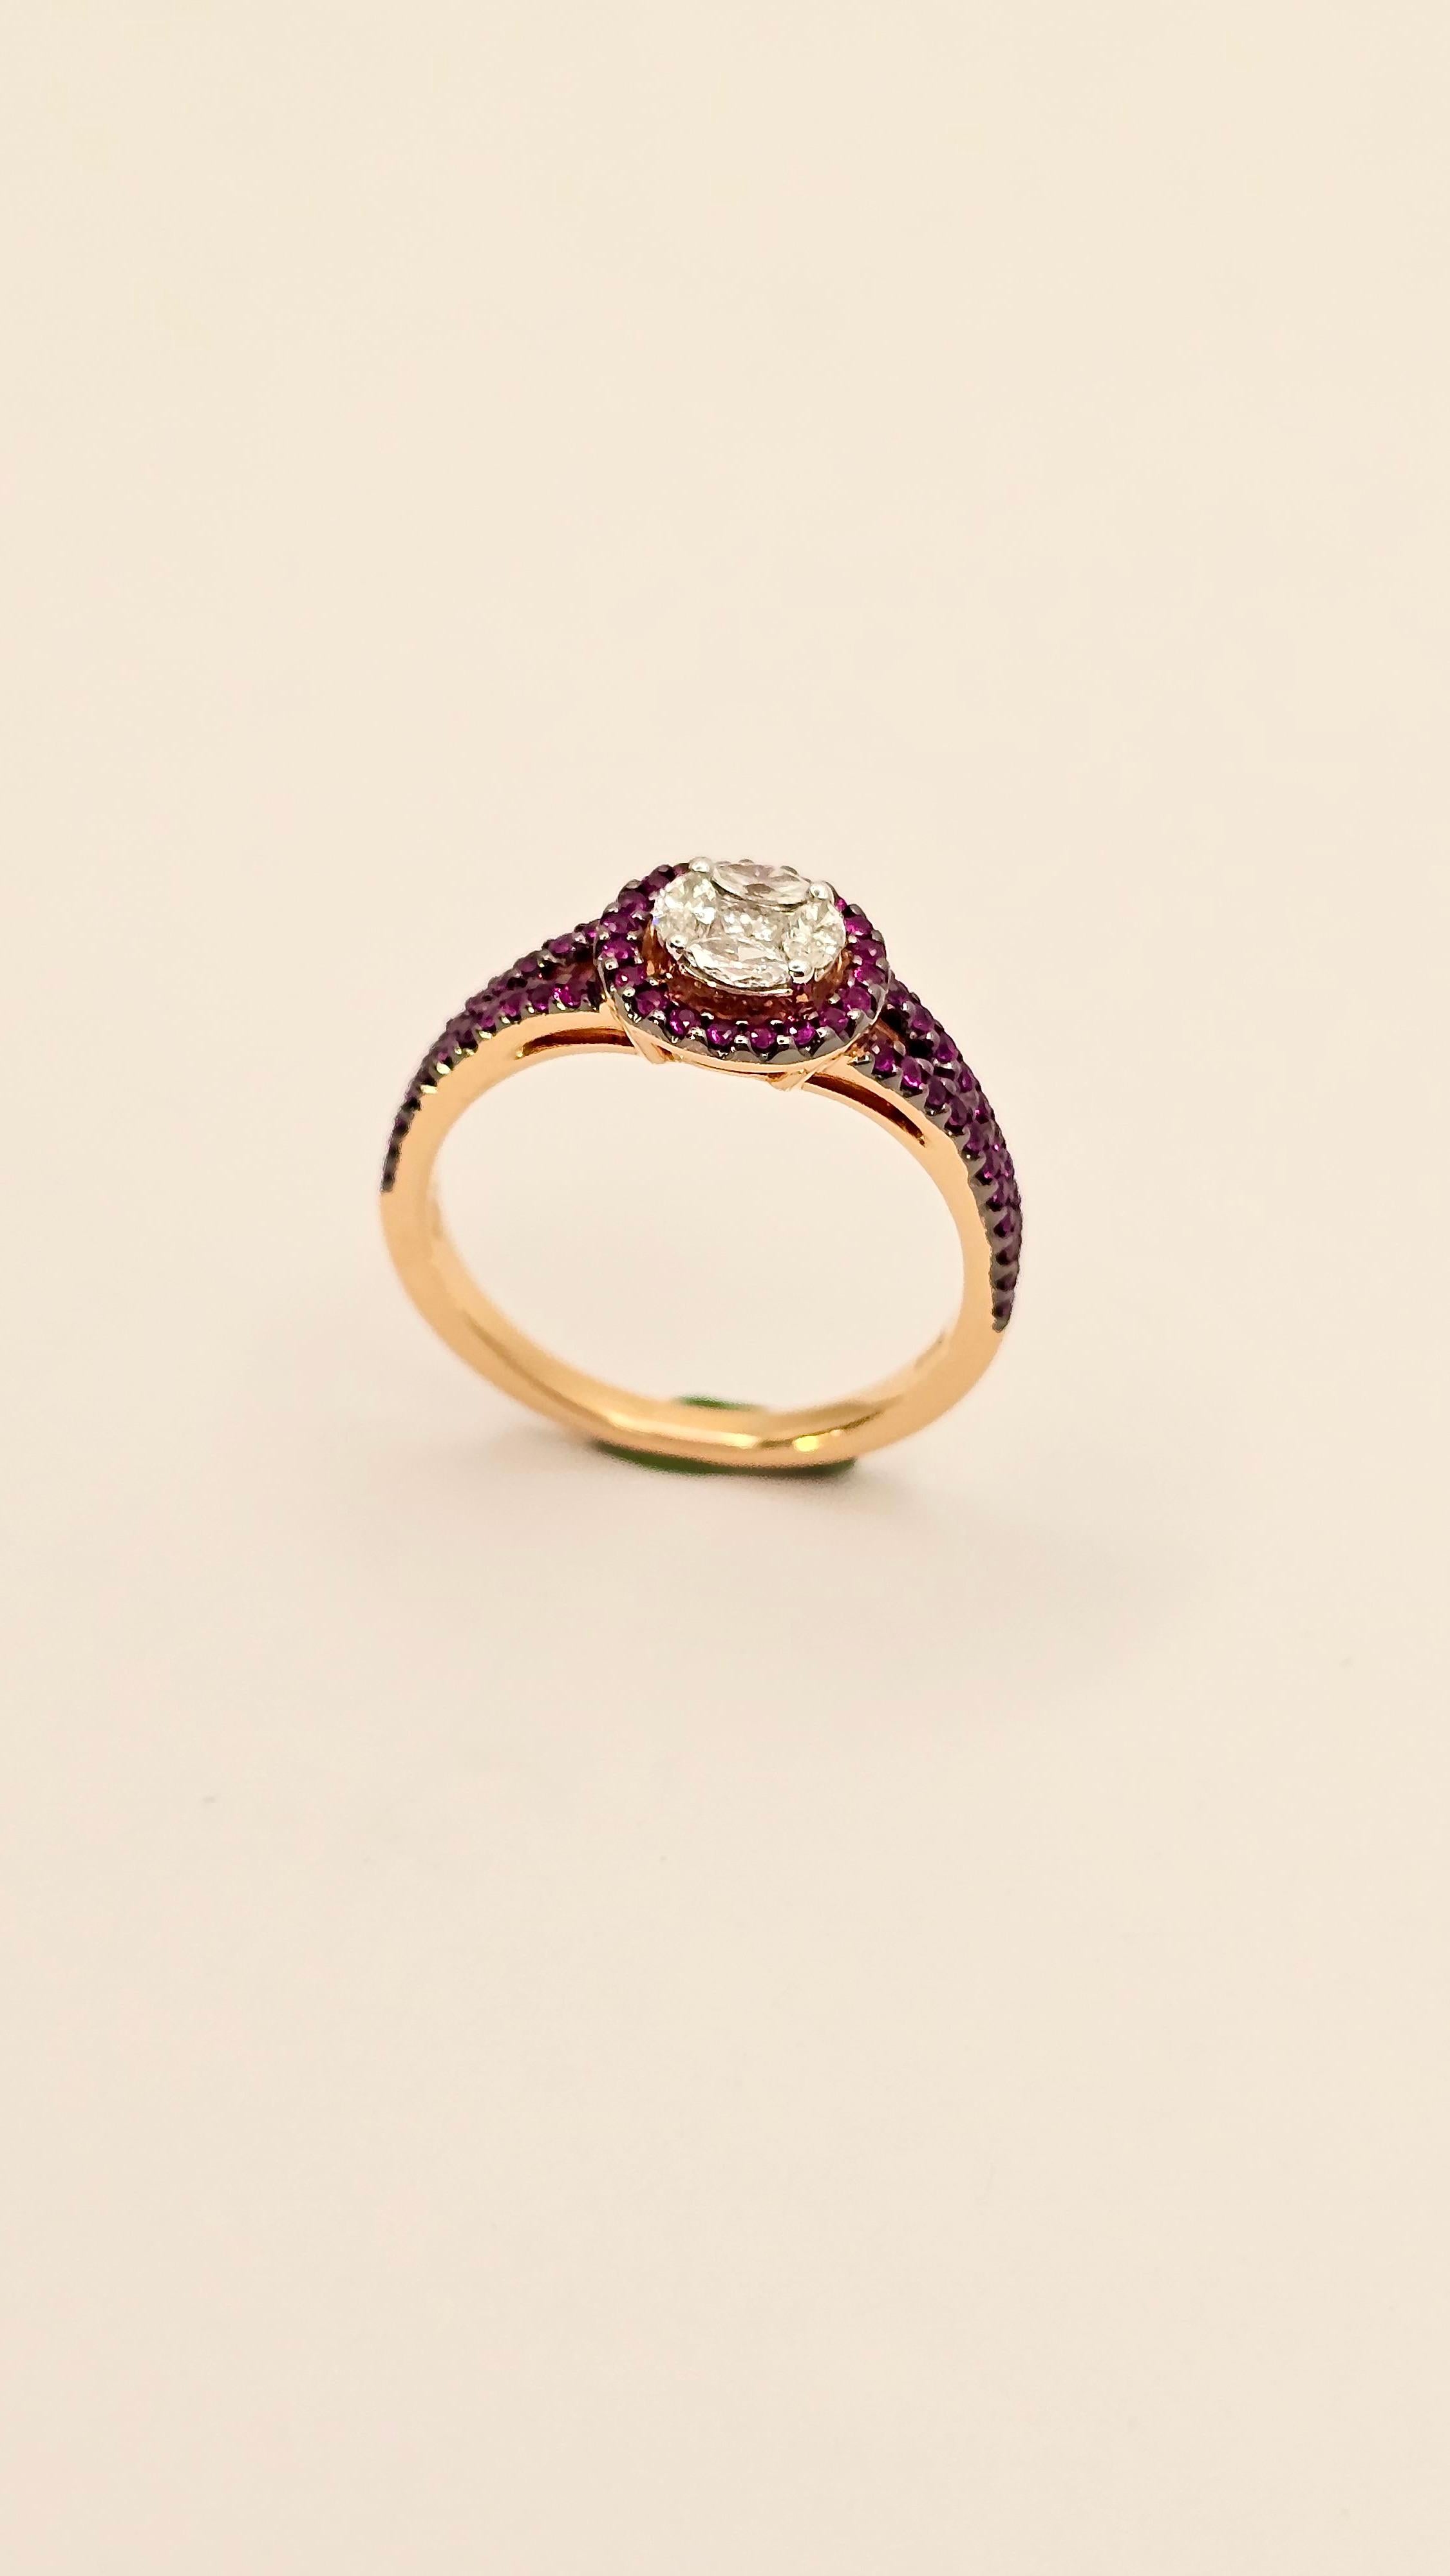 18 Kt Gold, Diamonds and Rubies Band Ring For Sale 1